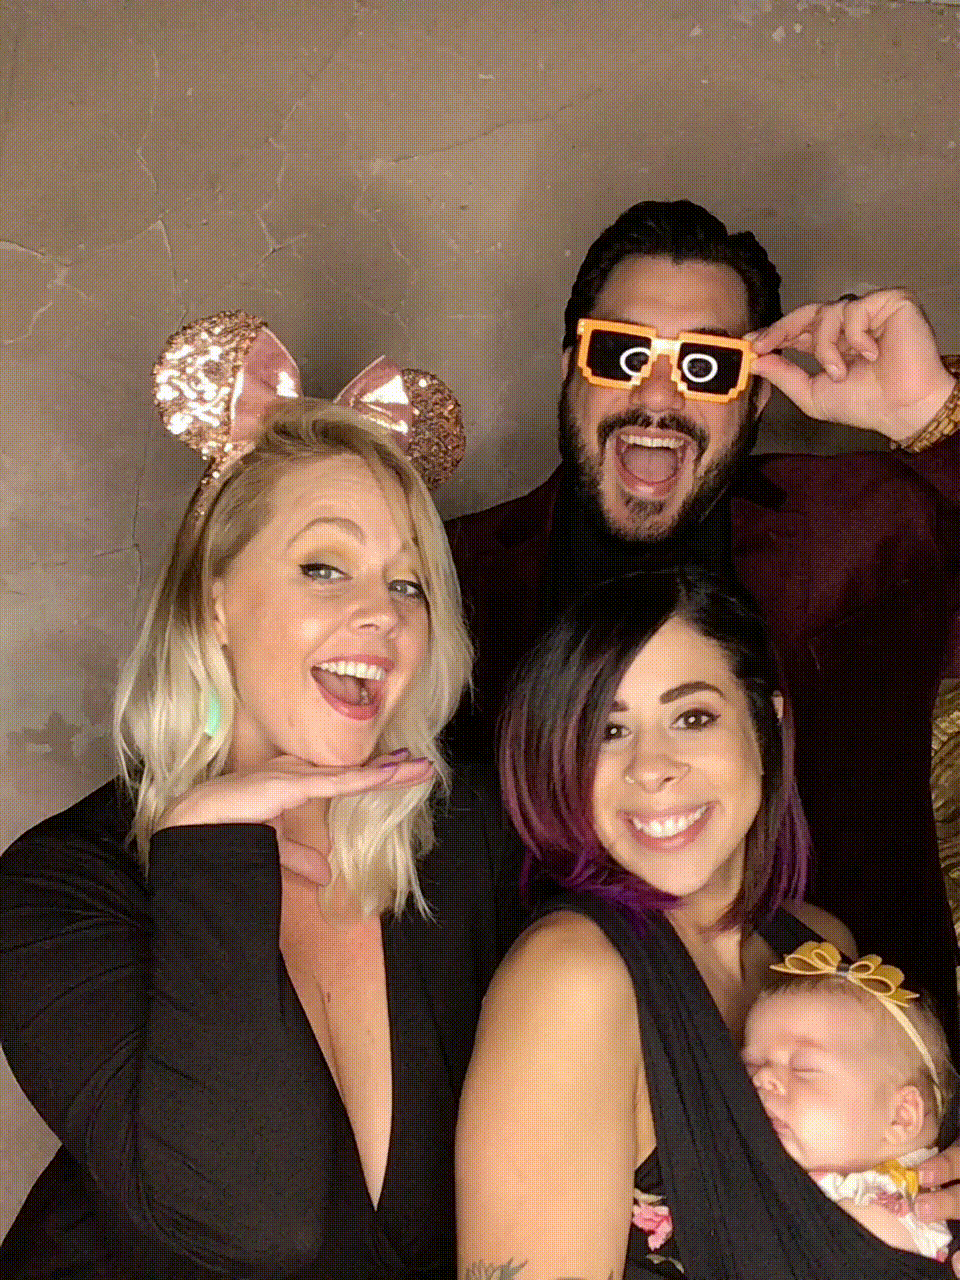 Family together in photo booth wearing props